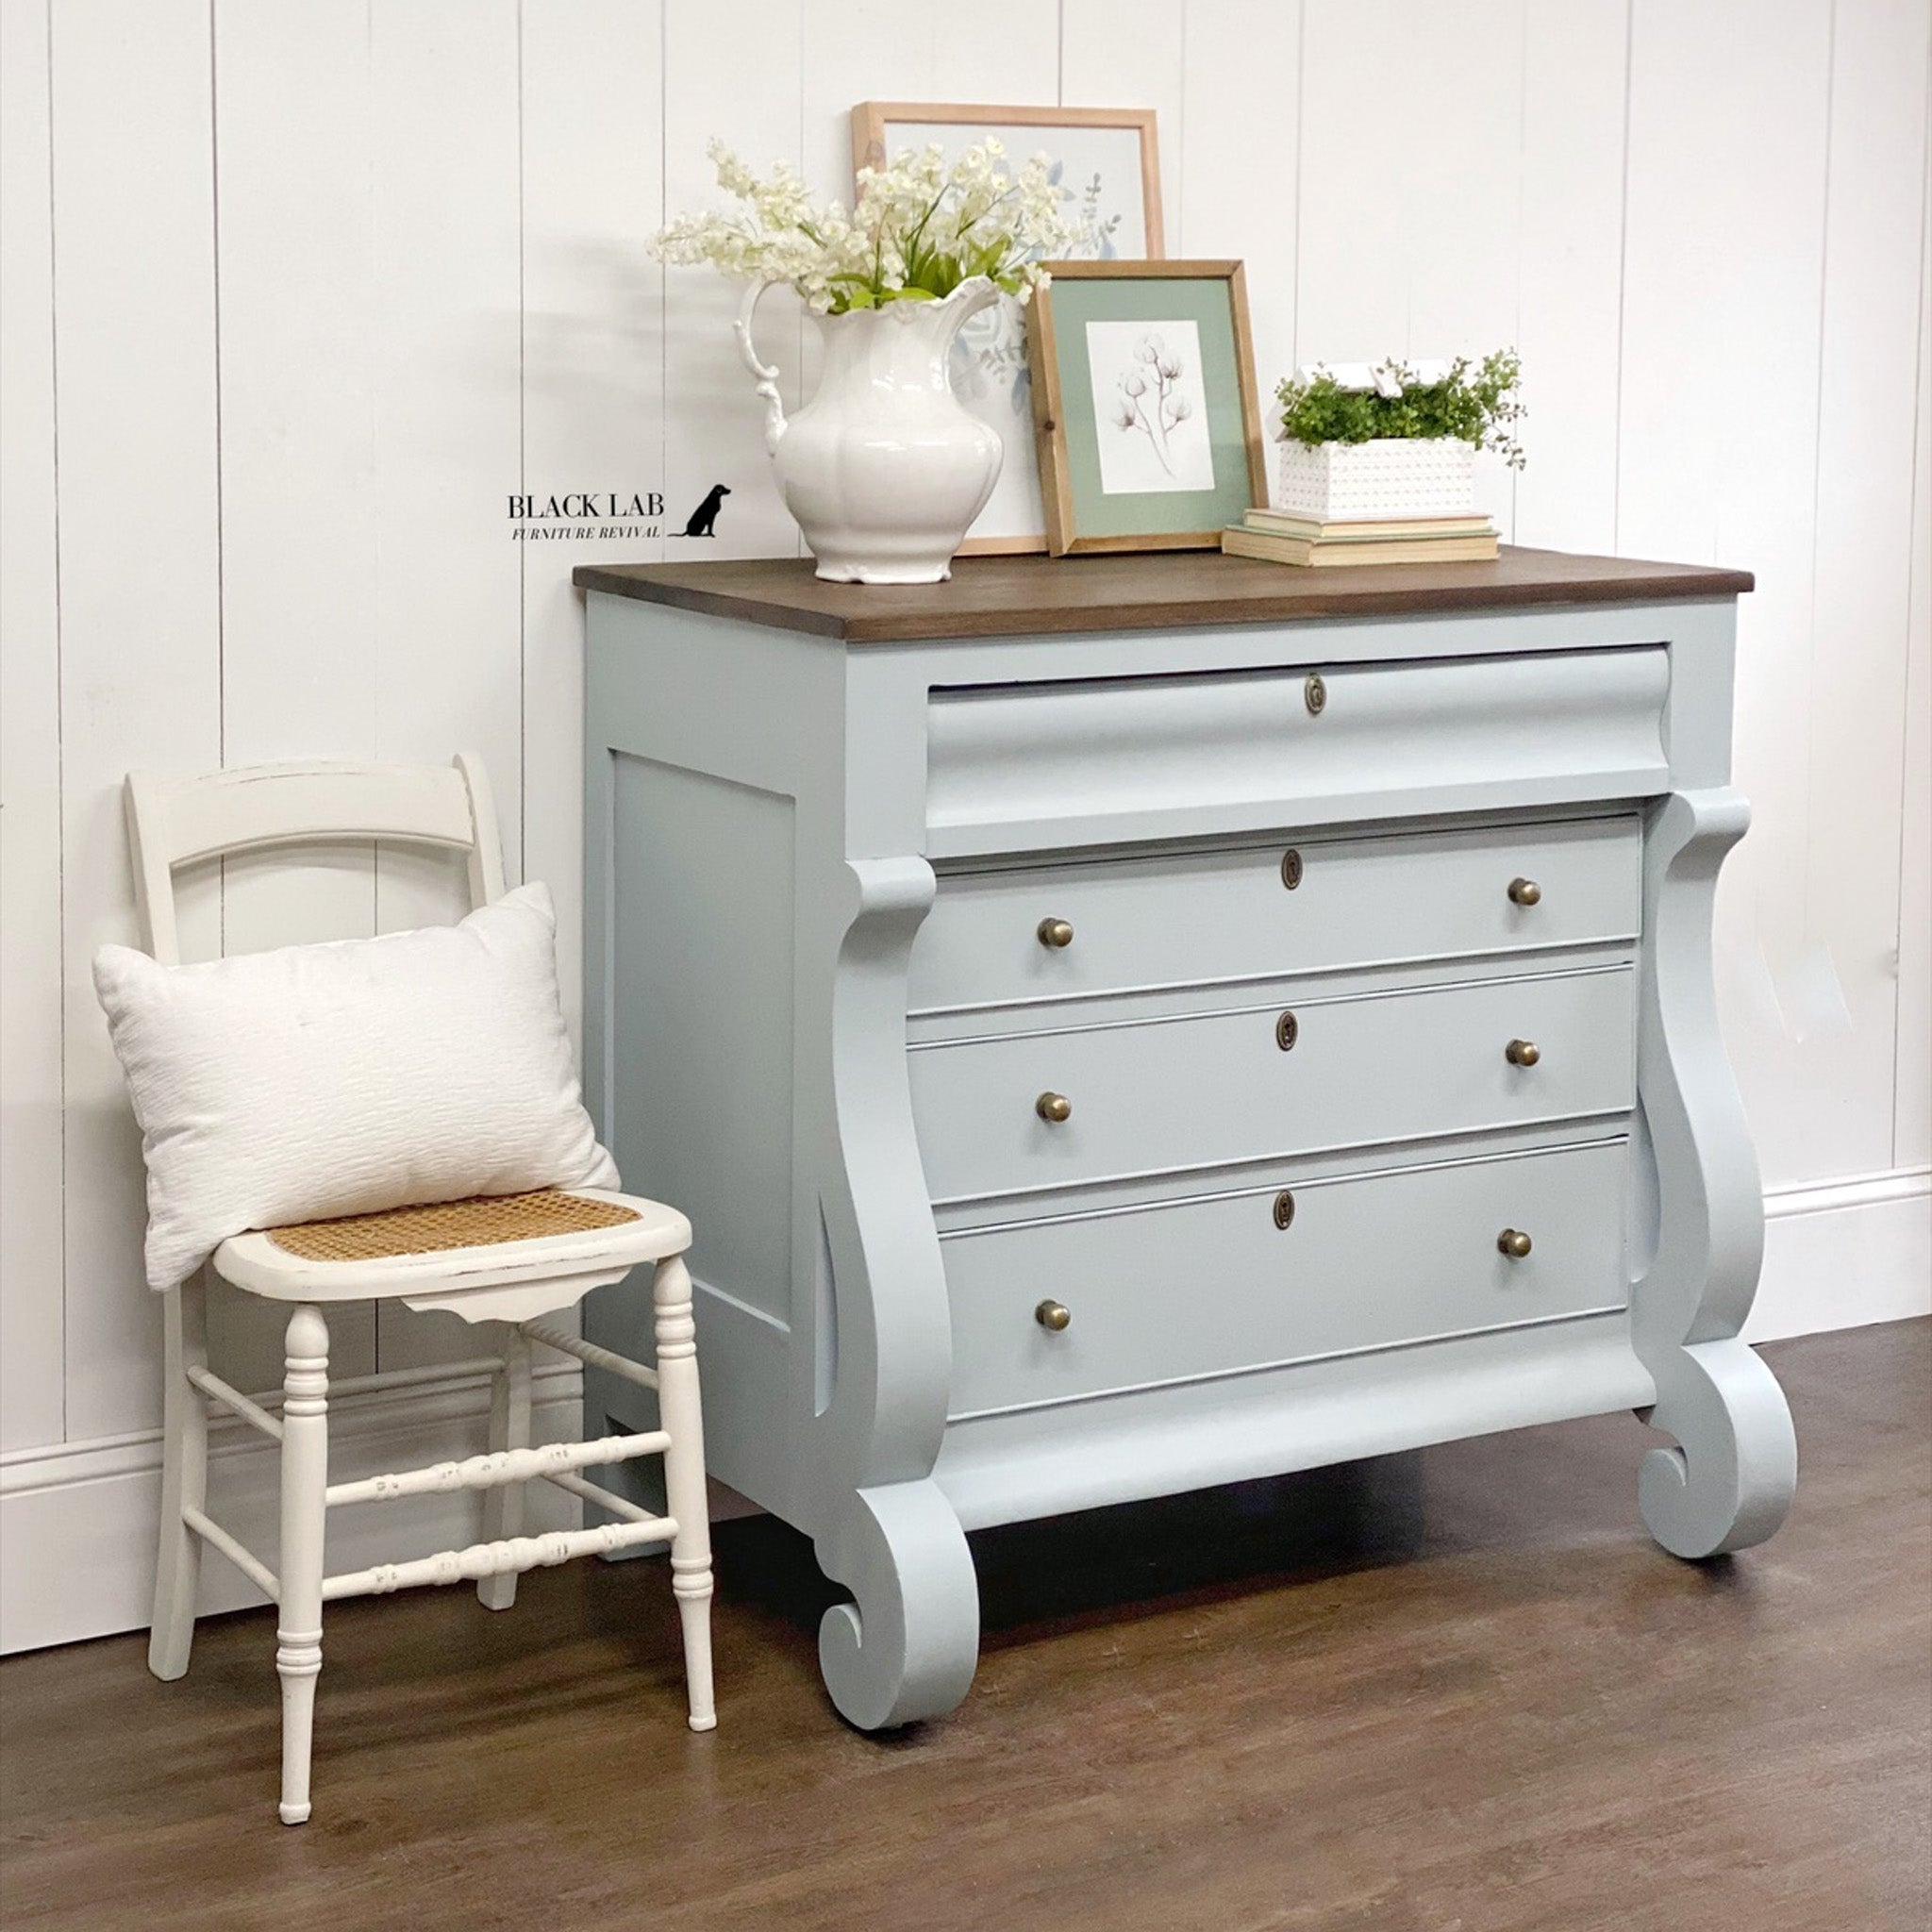 A vintage 4-drawer dresser refurbished by Black Lab Furniture Revival is painted in Dixie Belle's Savannah Mist chalk mineral paint and has a natural wood top.